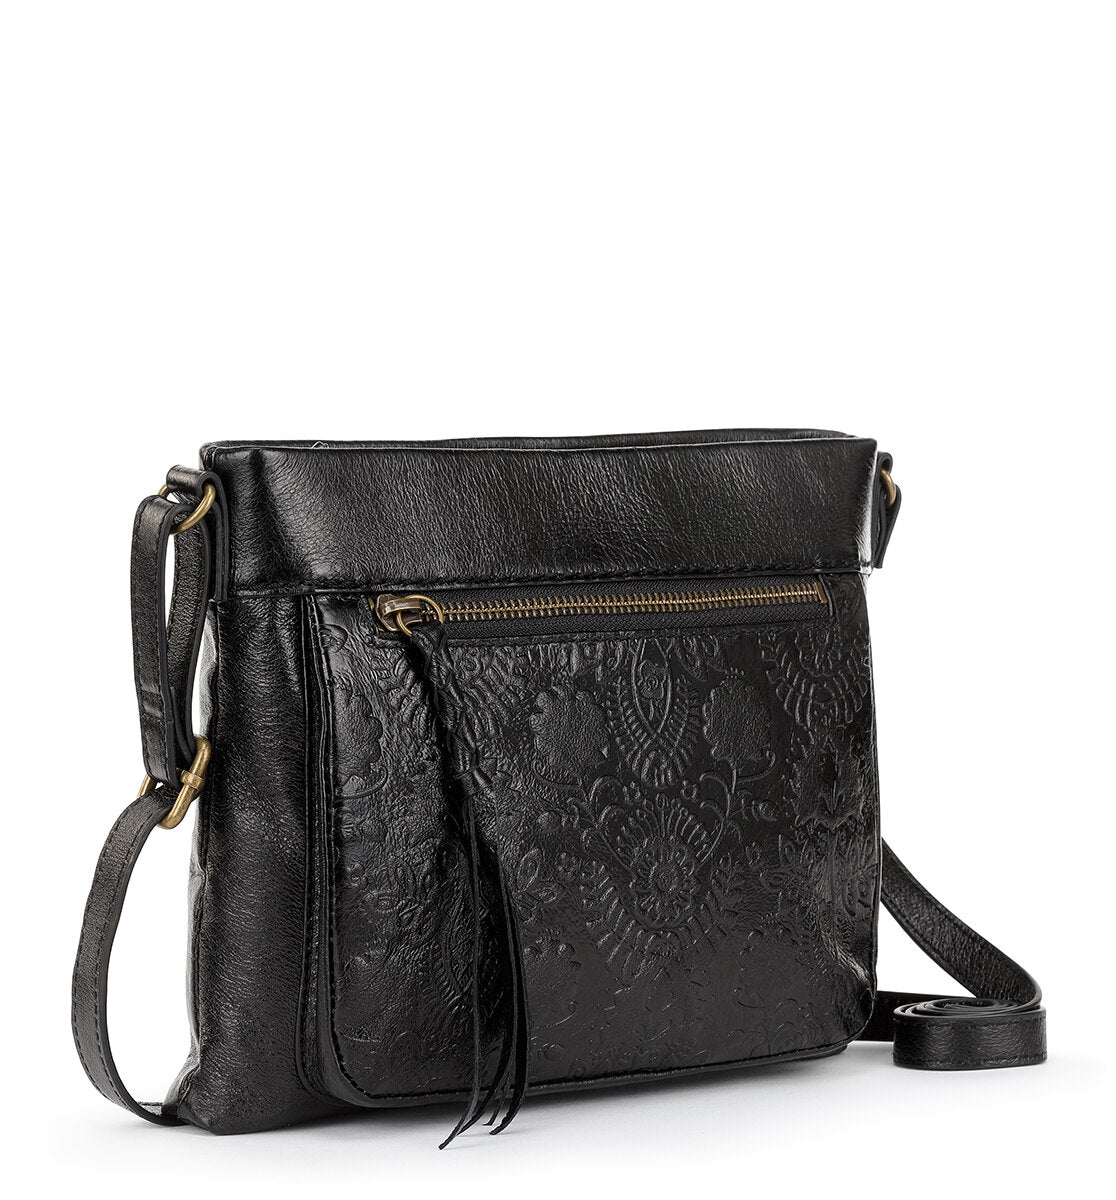 The Sak Women's Casual Silverlake Crossbody Bag in Leather, Purse with  Adjustable Strap & Zipper Pockets, Tobacco Floral Embossed Ii, One Size,  Tobacco Floral Embossed Ii, One Size : Amazon.in: Shoes &